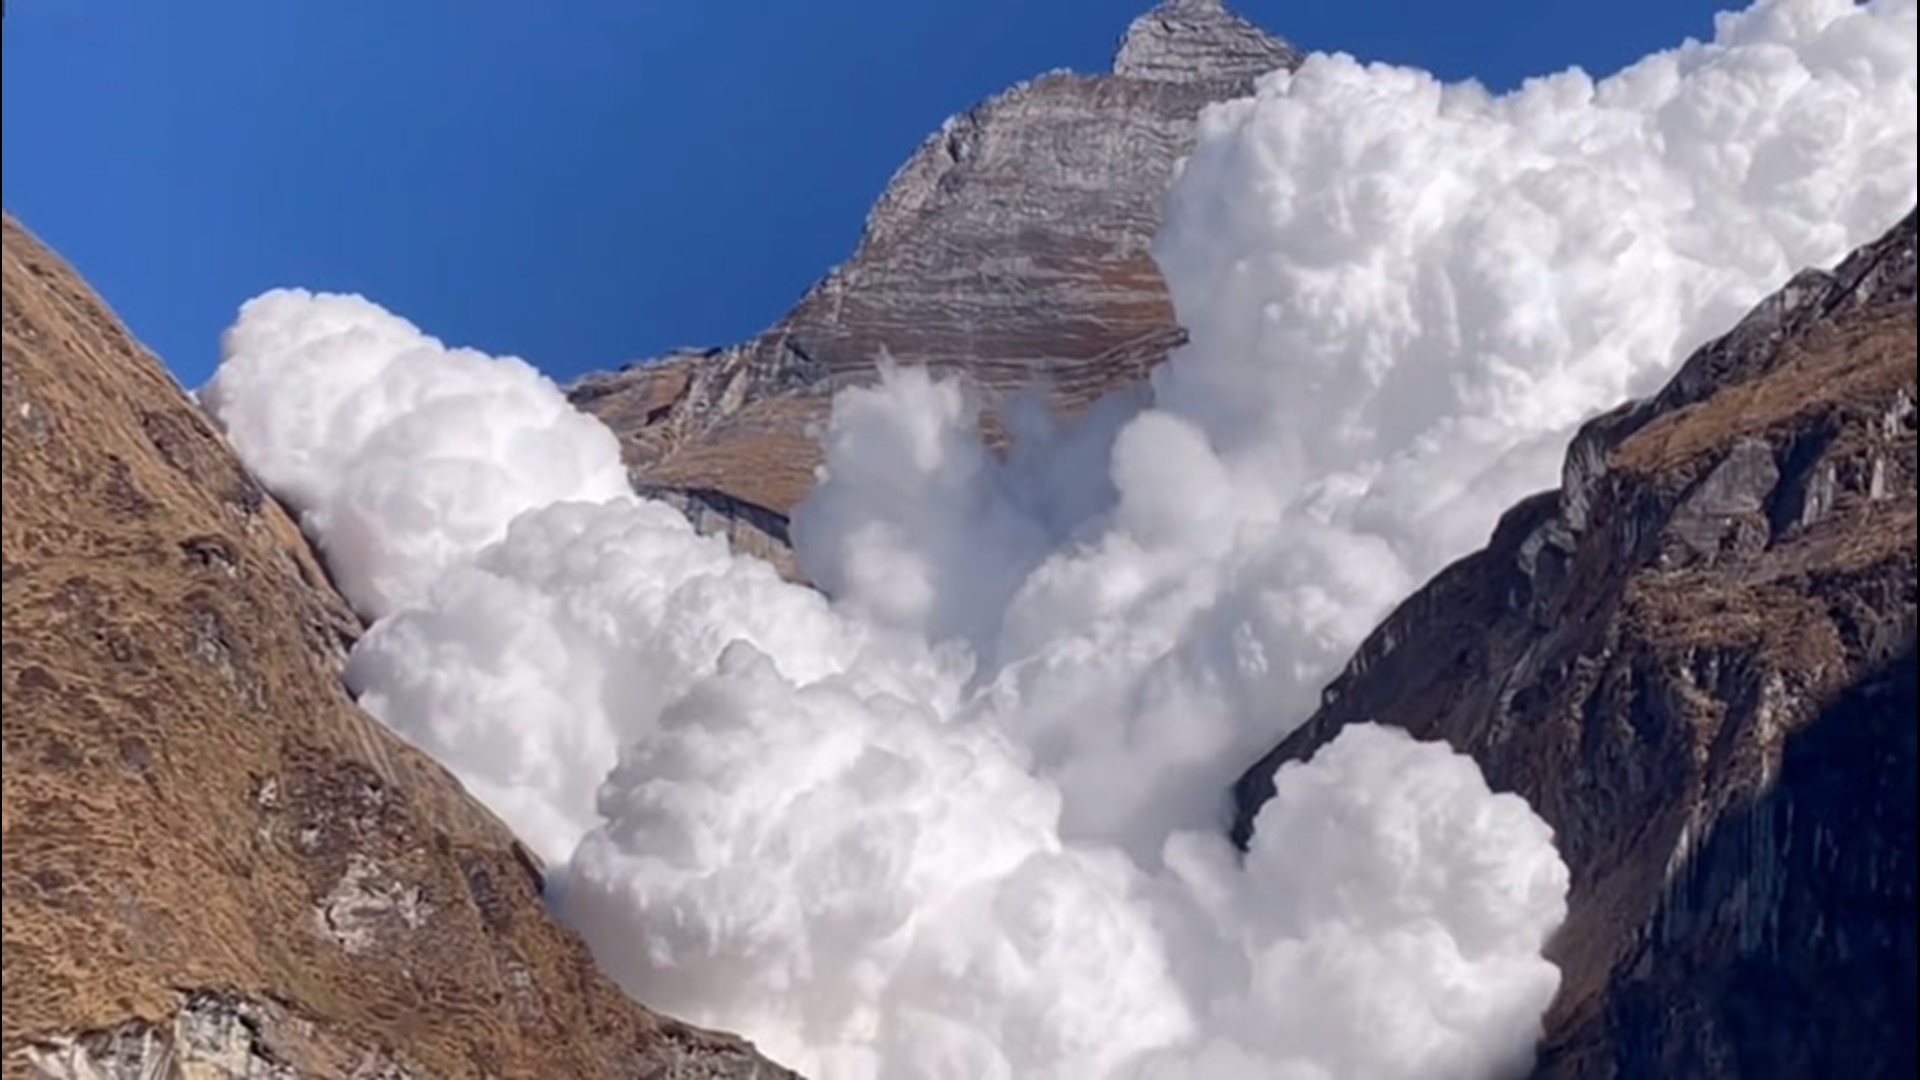 You'd expect to capture some spectacular images on camera if you're kayaking at a glacier lake in Nepal, but one group of campers saw something they never expected to see: a massive avalanche.